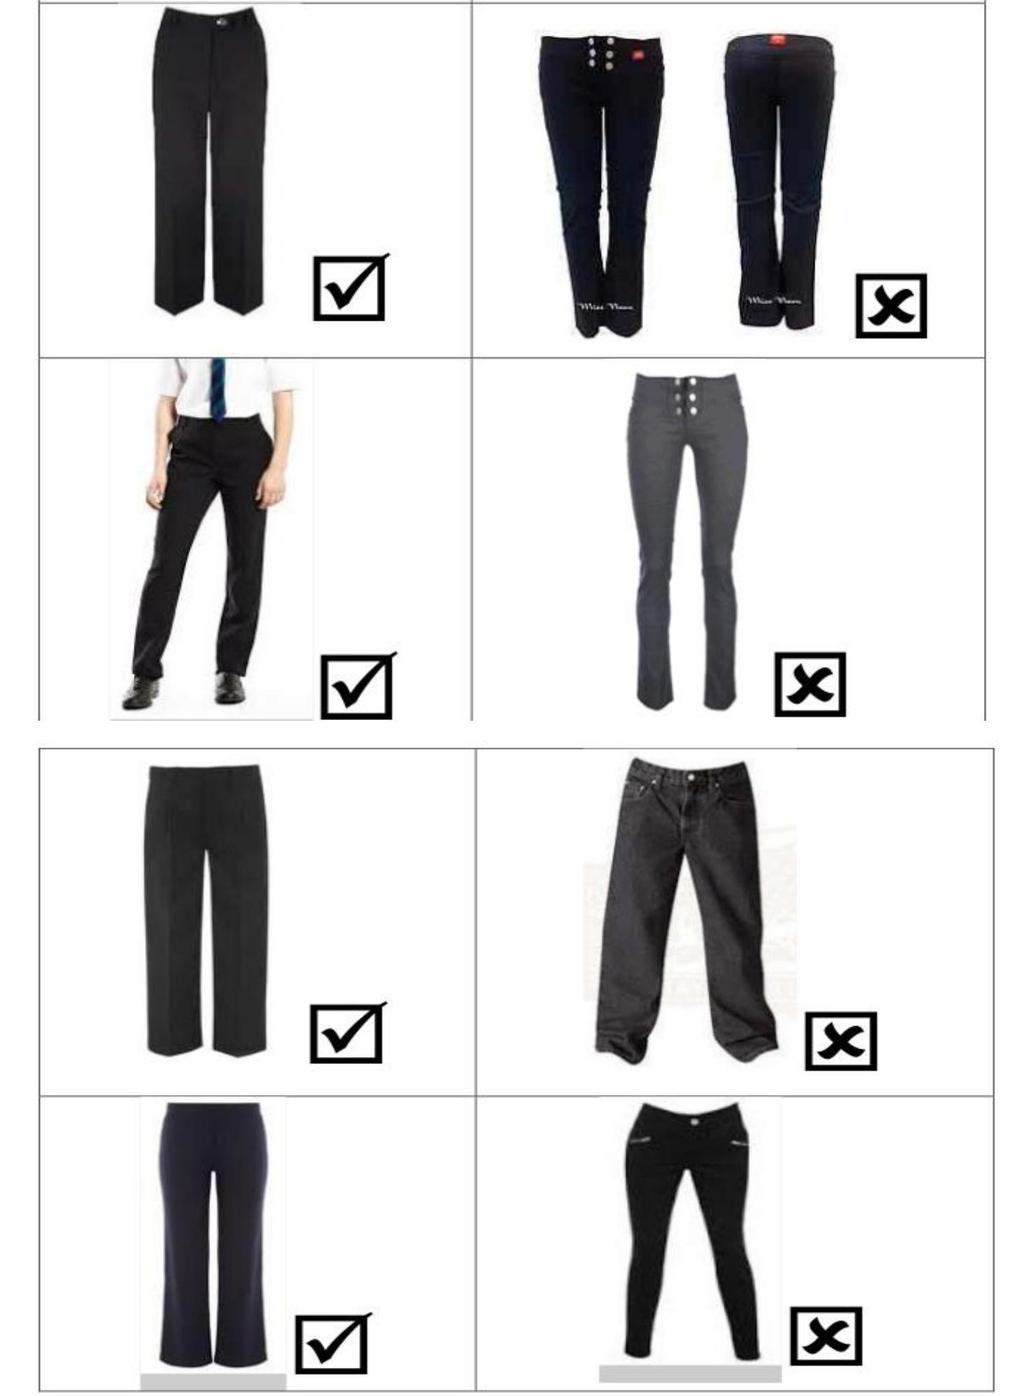 Trousers Trousers should be smart in appearance. Hipsters, cargo style, skin tight trousers, jeggings and leggings are not permitted.